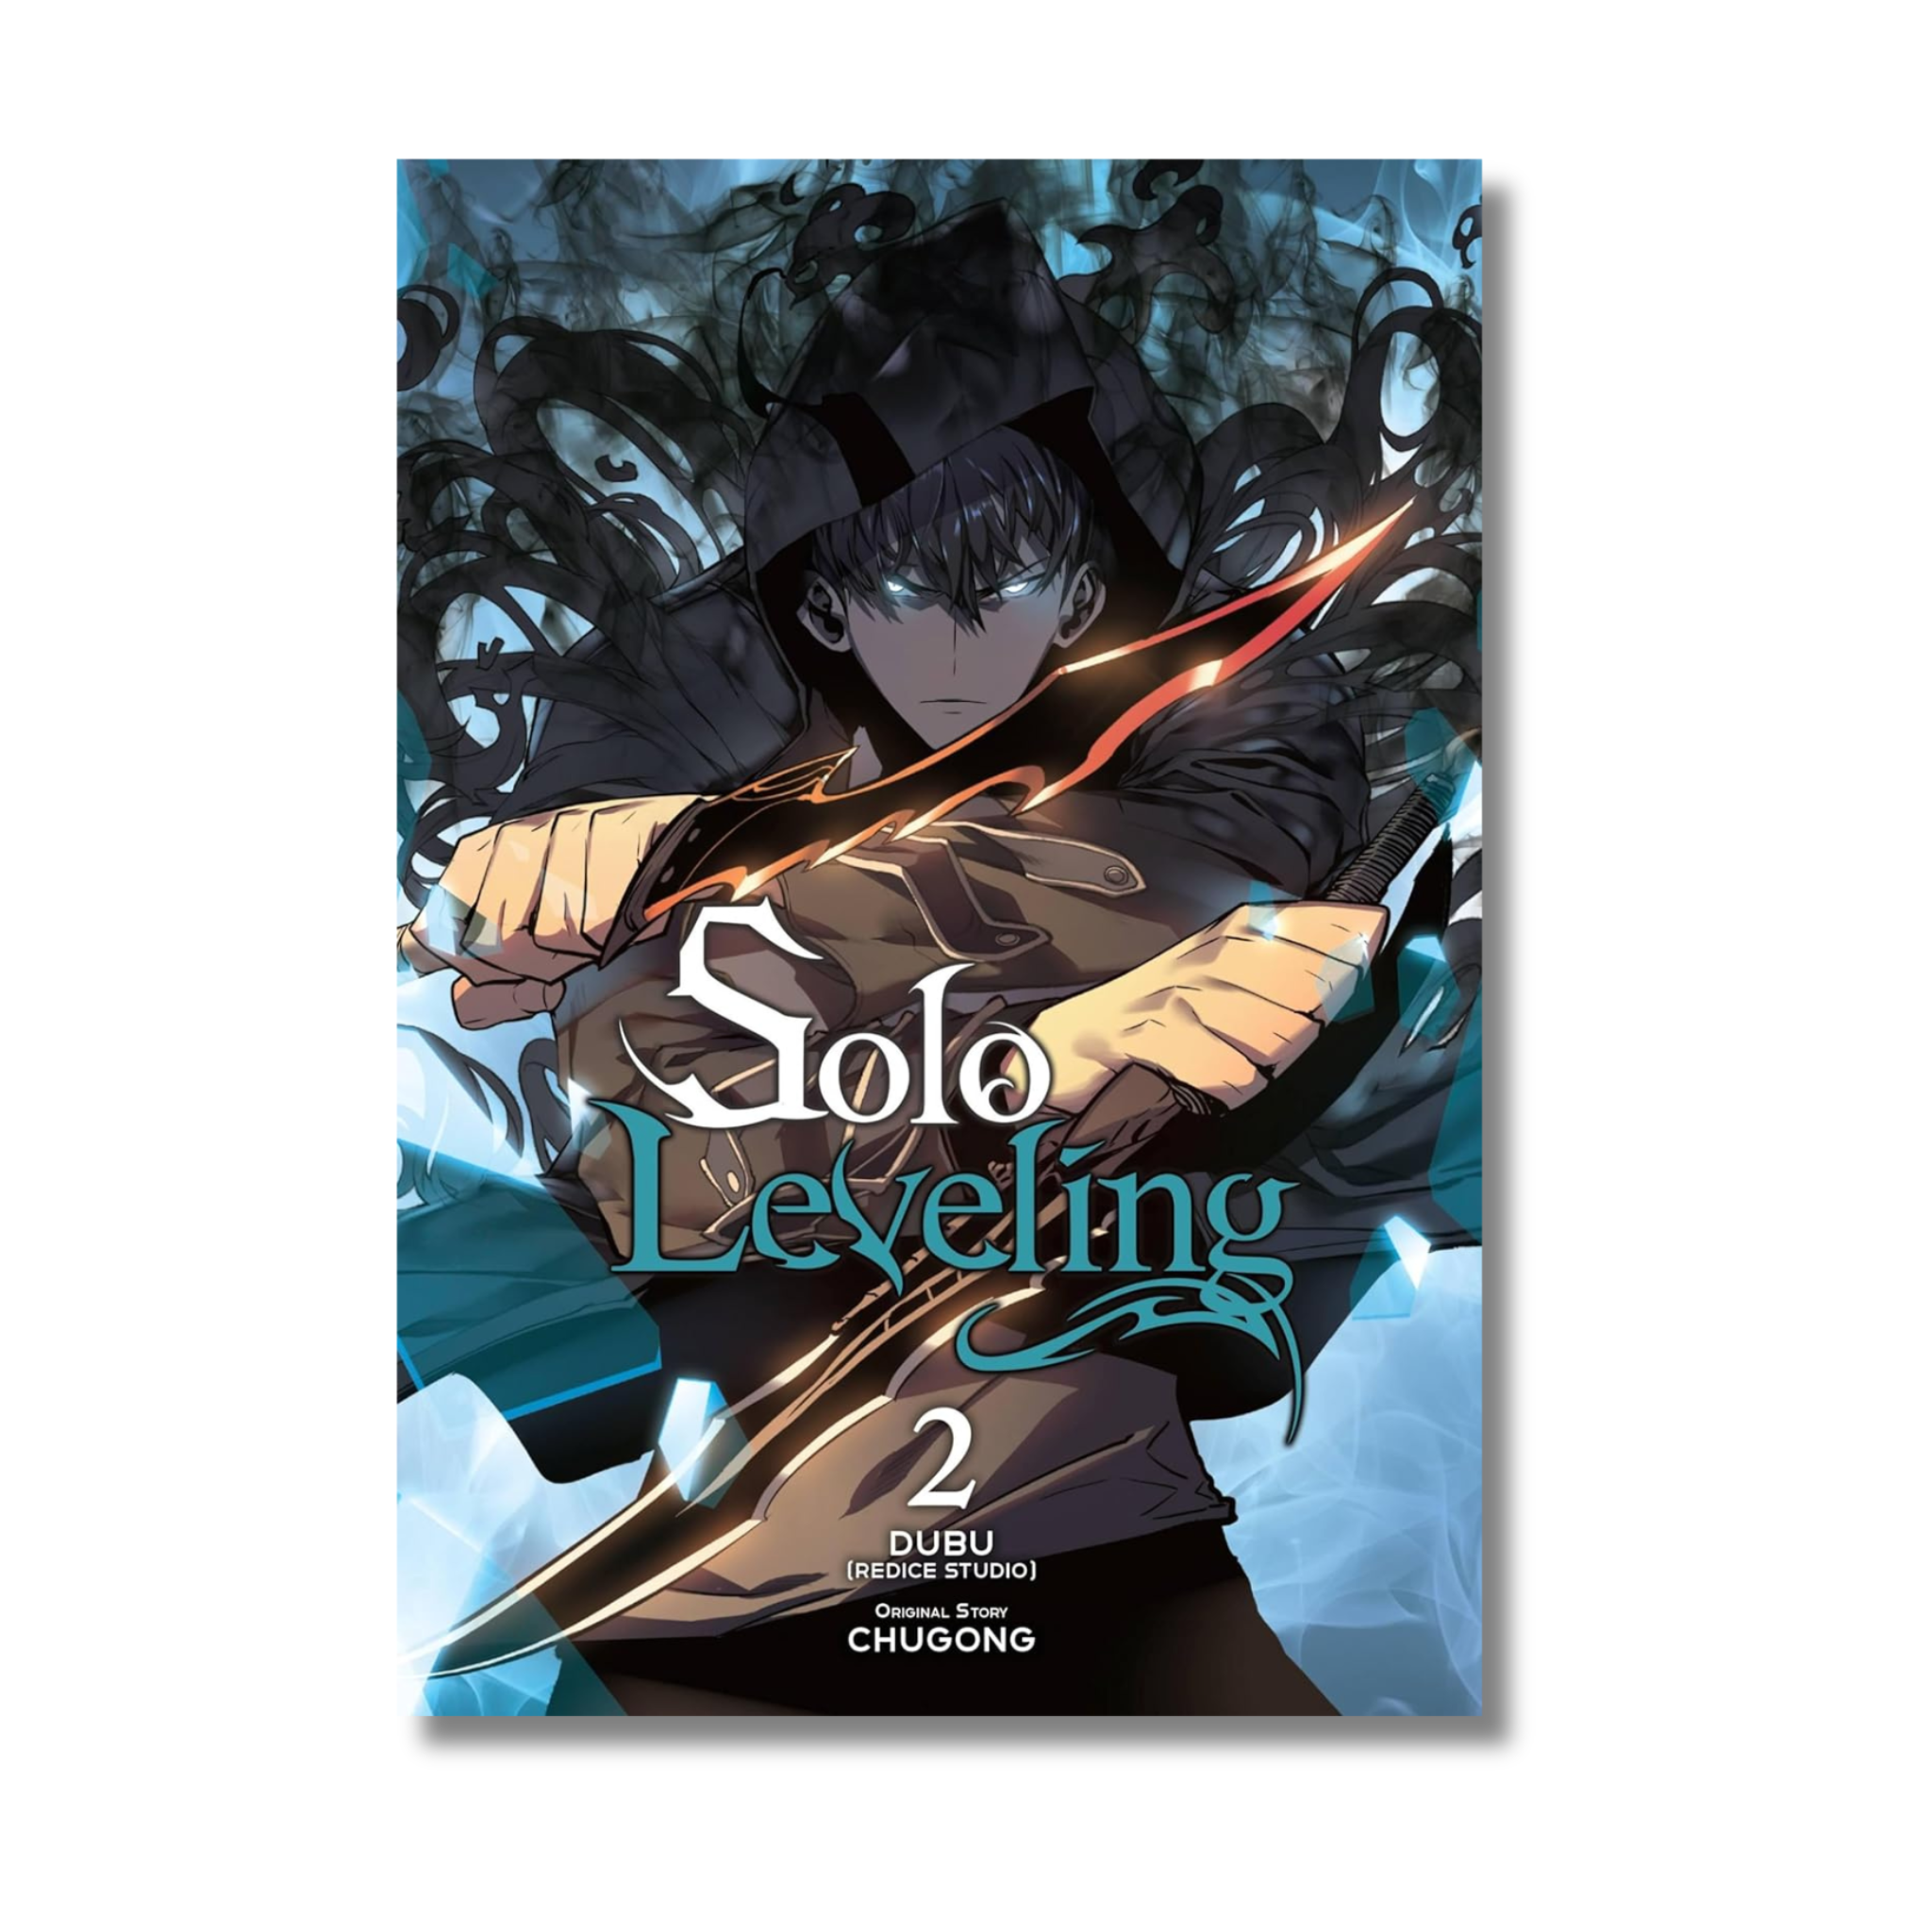 Solo Leveling Combo: Vol 1 & 2 by Chugong (Black and White